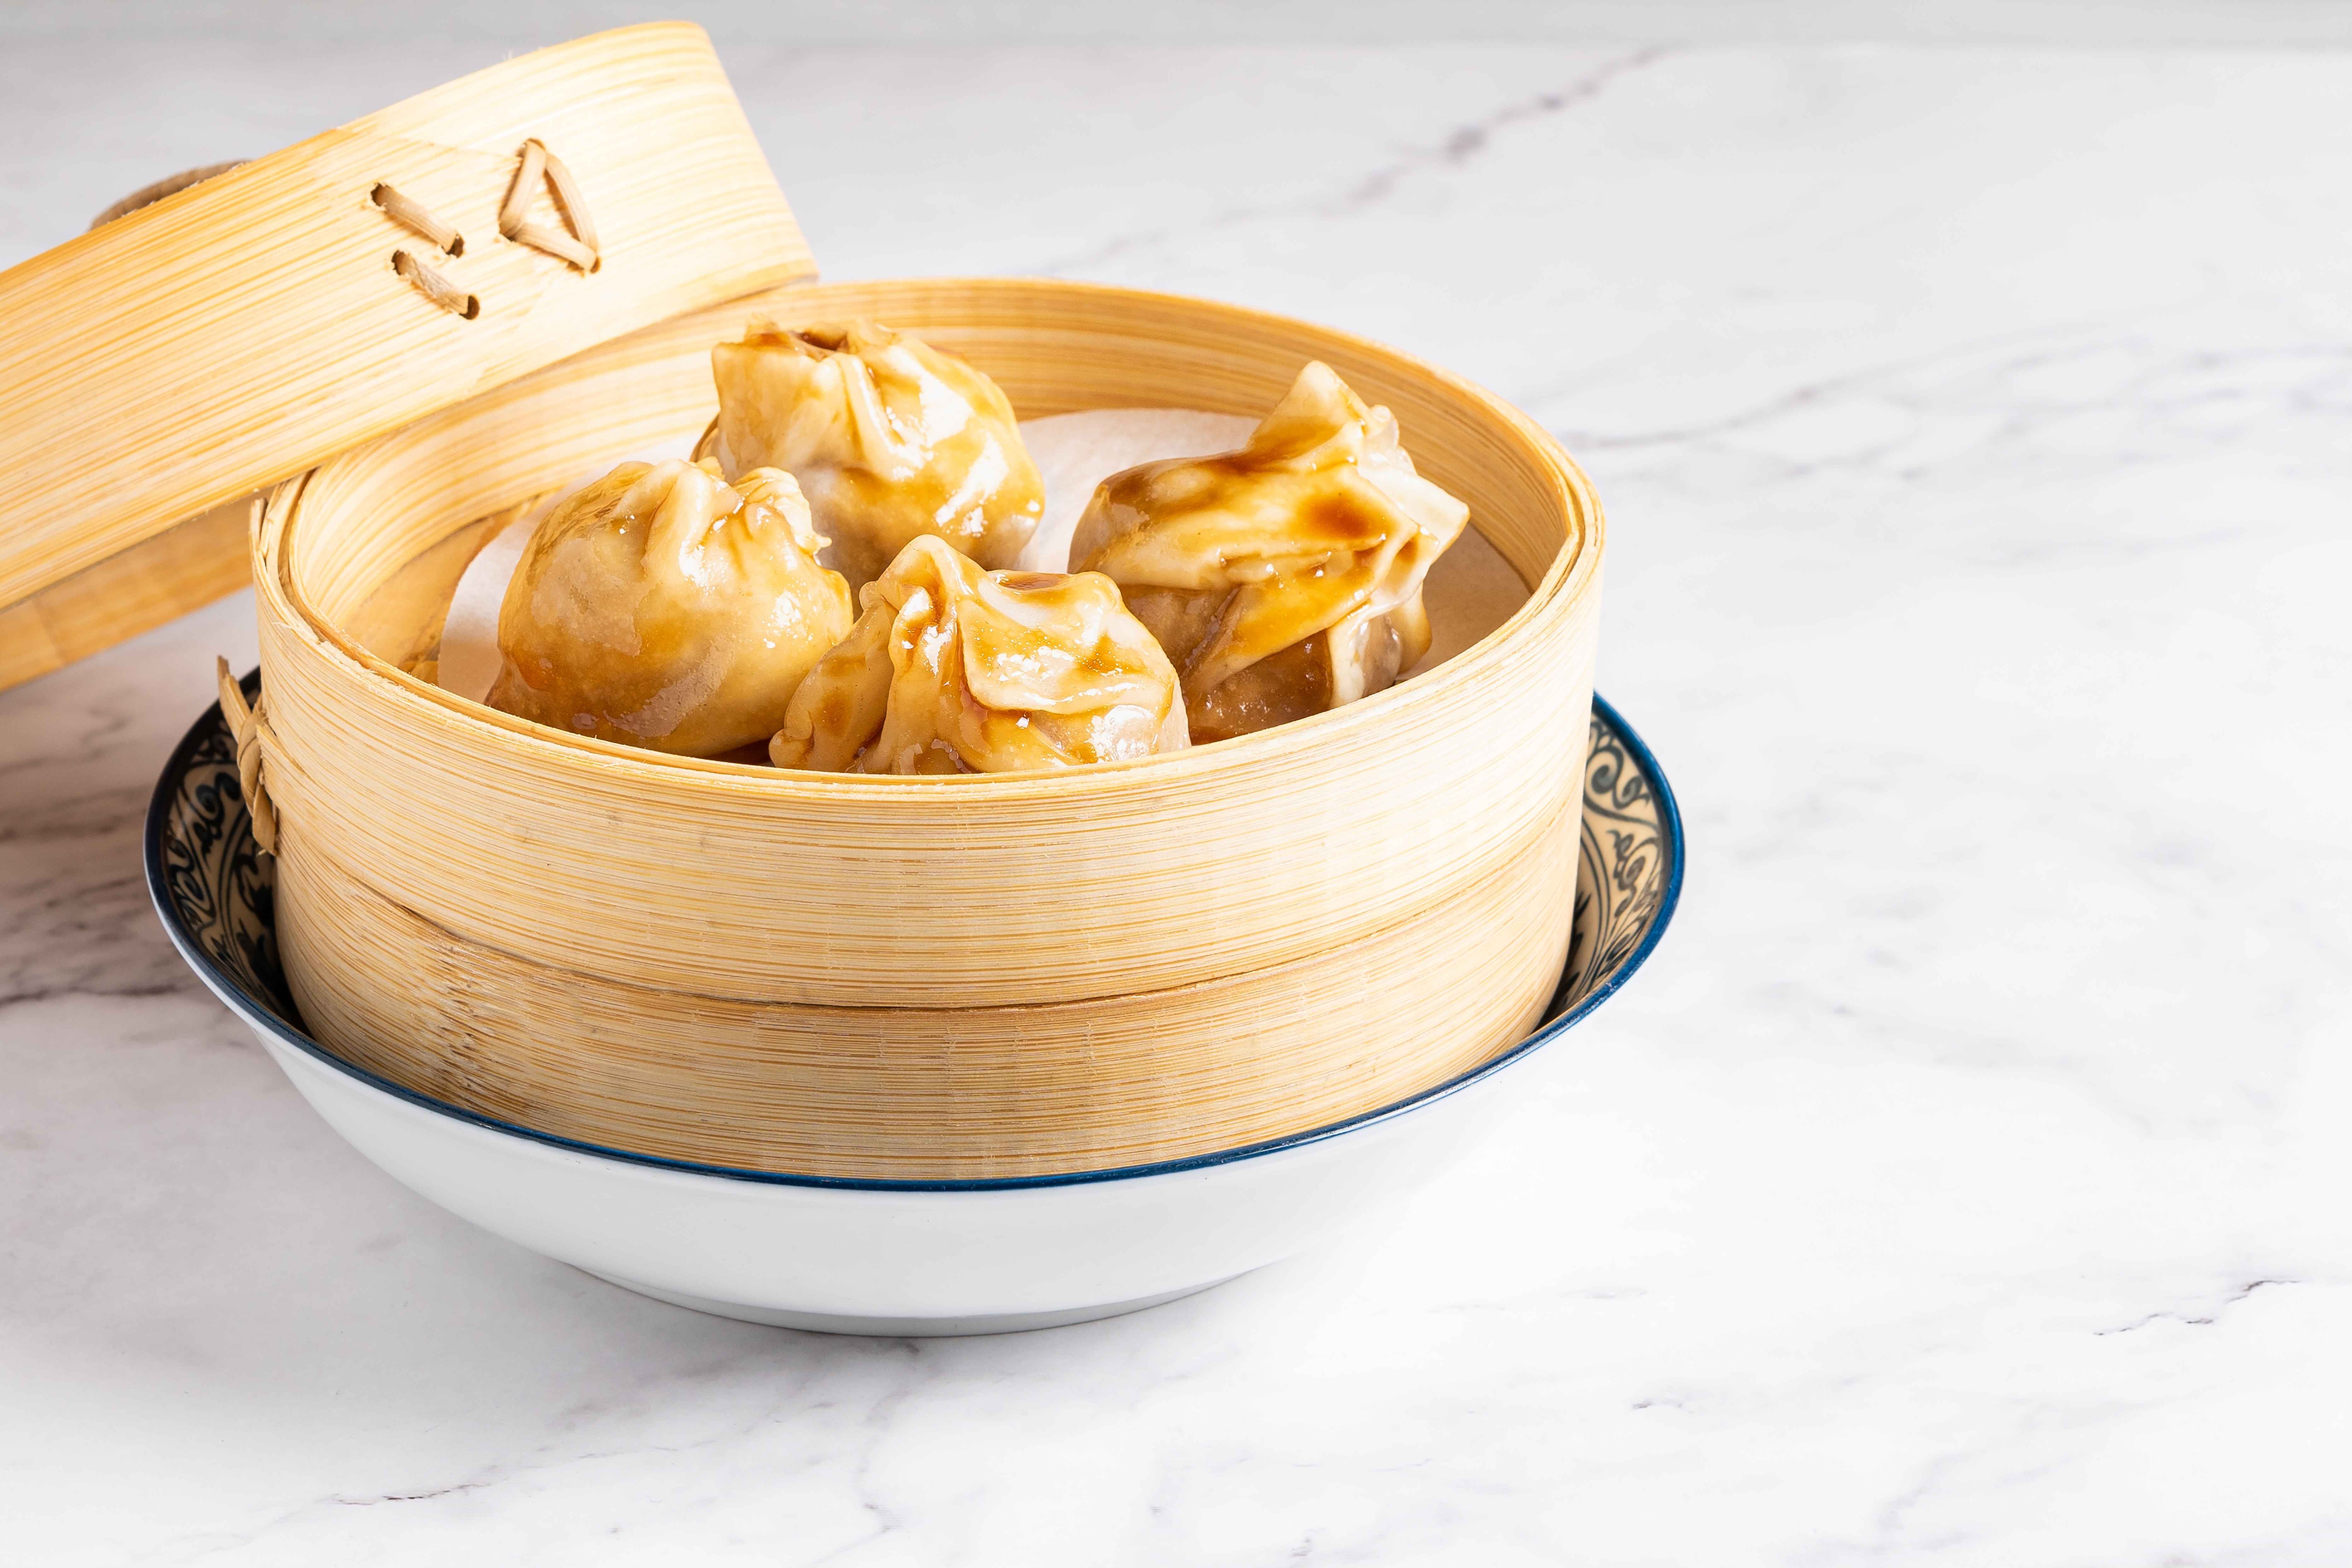 A high-quality bamboo steamer makes a great gift for your girlfriend.